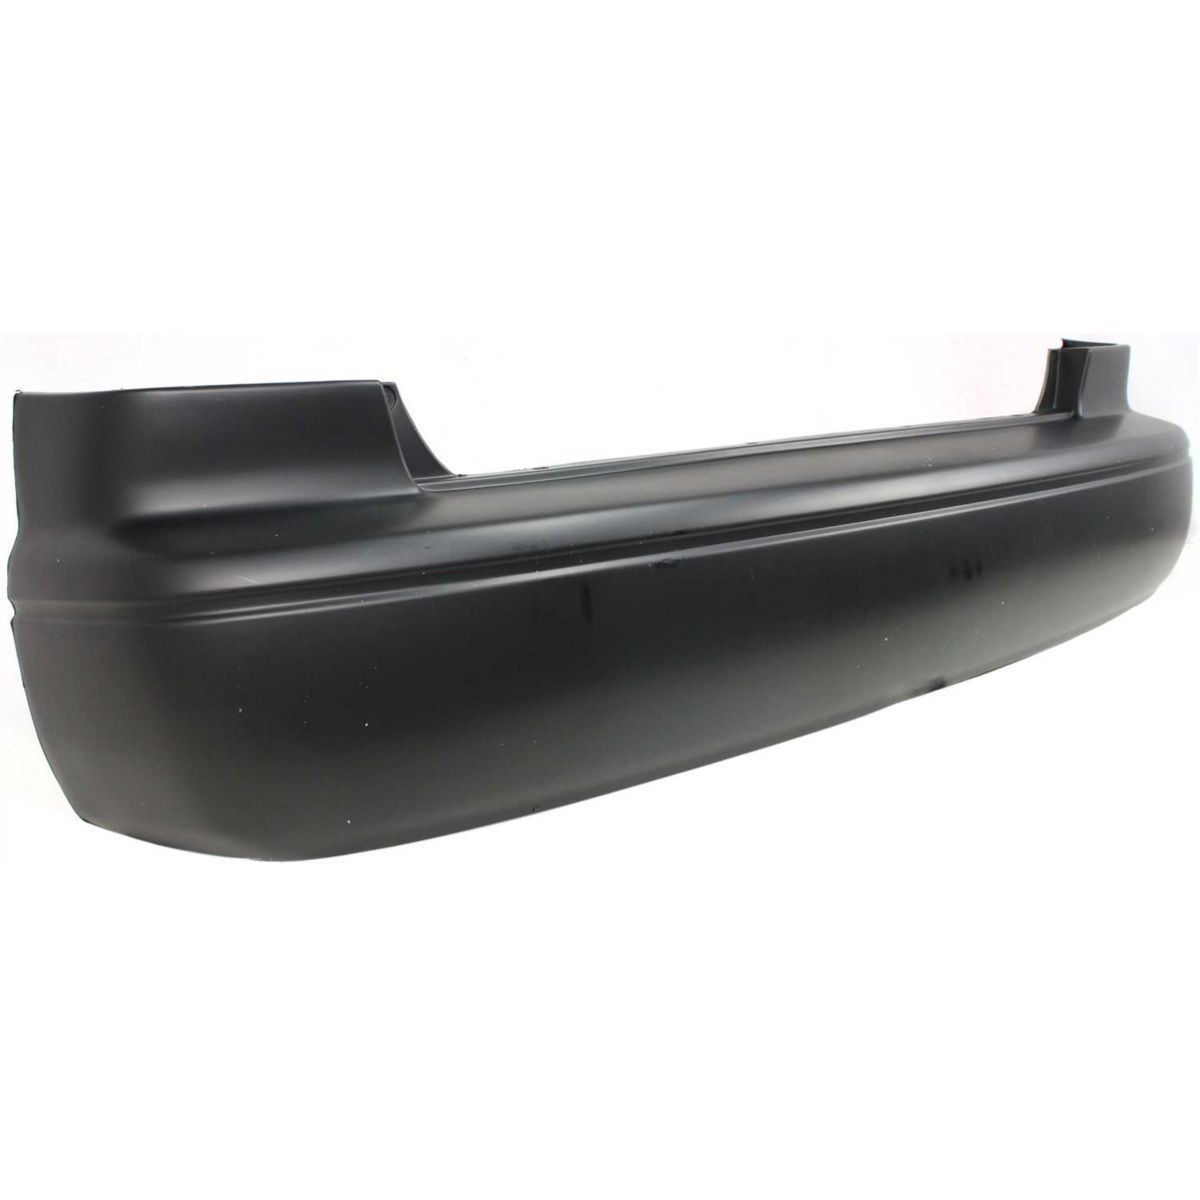 2000-2001 TOYOTA CAMRY Rear Bumper Cover Painted to Match